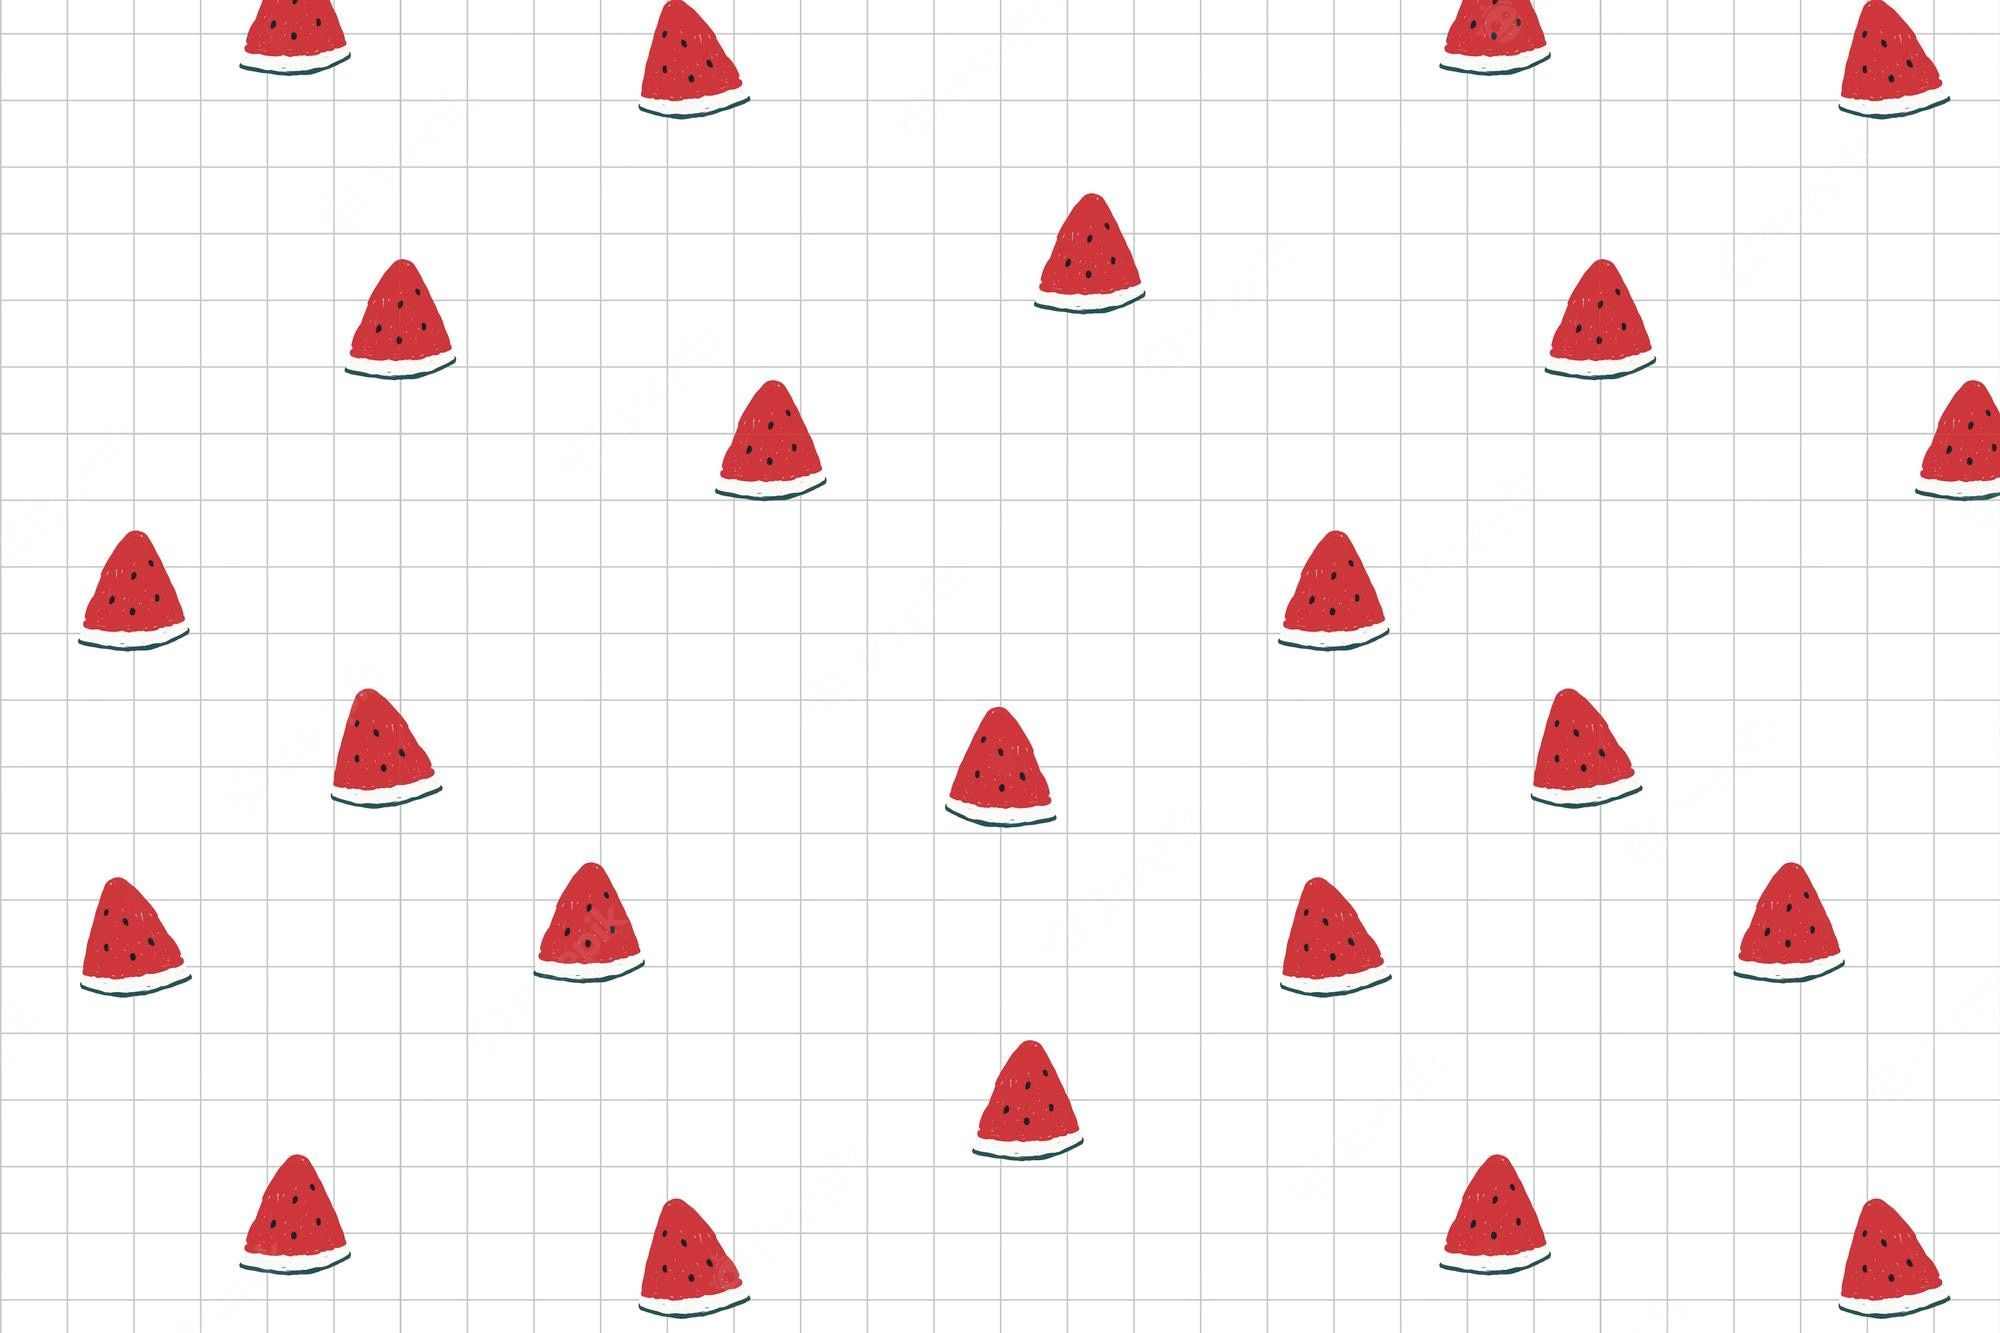 A pattern of watermelon slices on graph paper - Watermelon